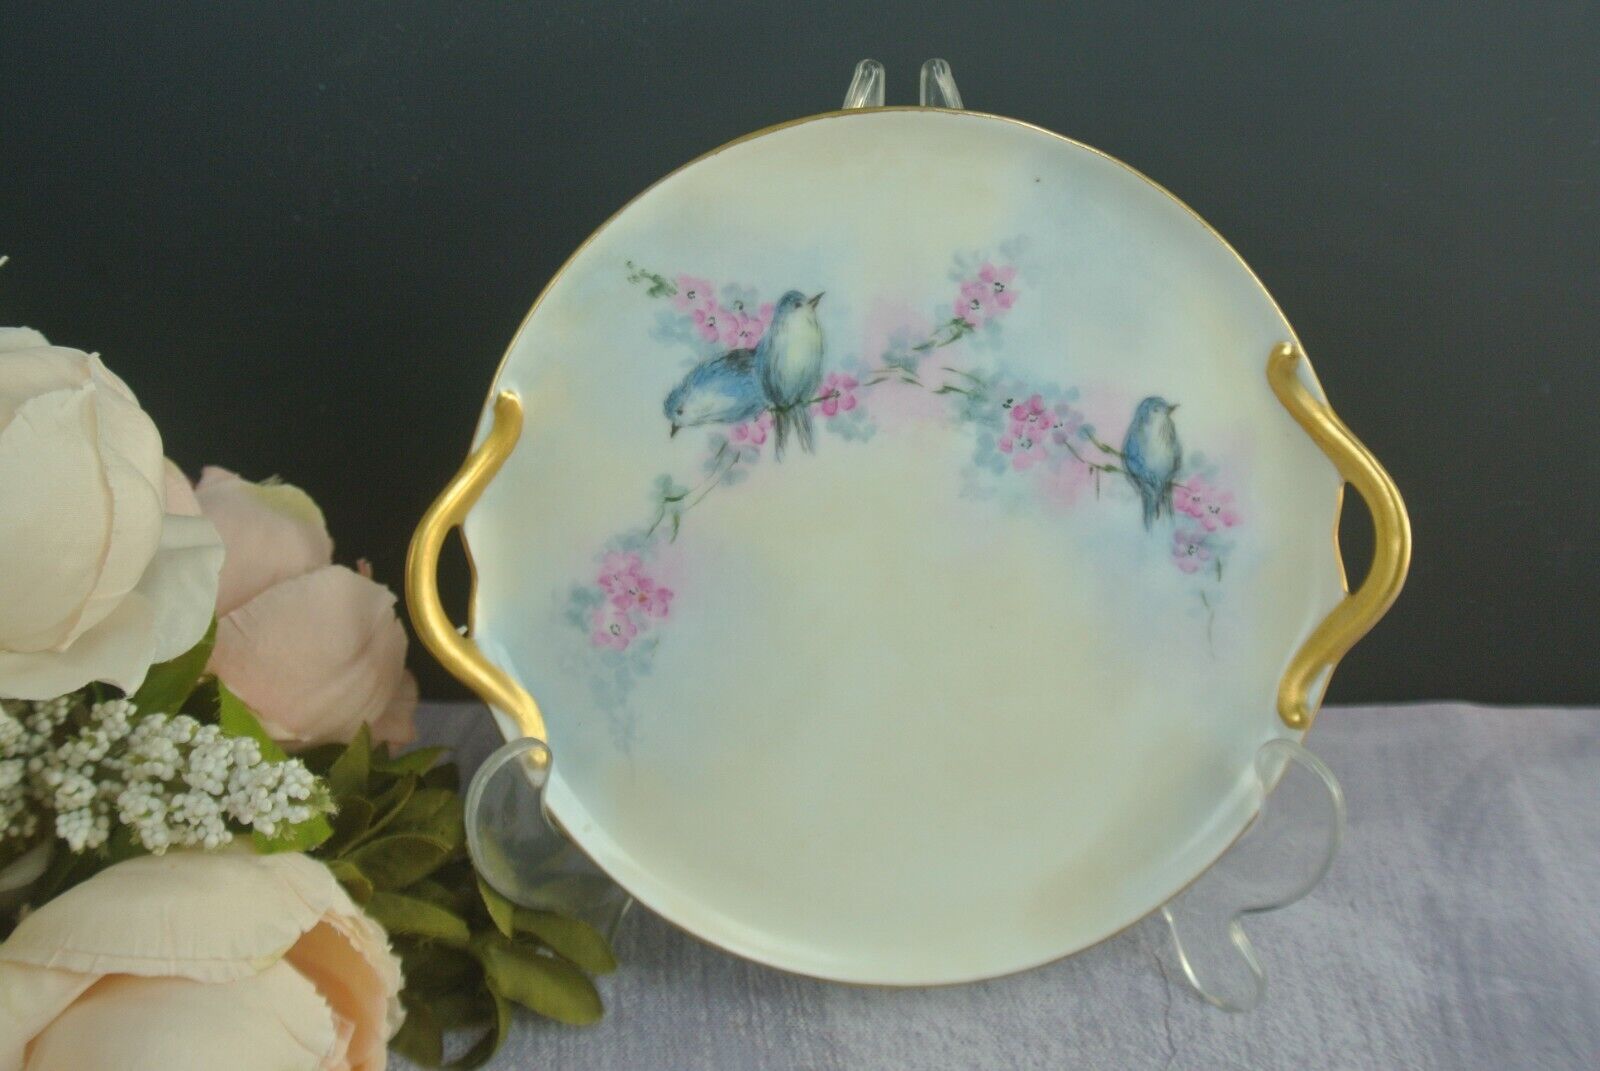 Vintage RS Reinhold Schlegelmilch Germany Small Handpainted Decorative Plate